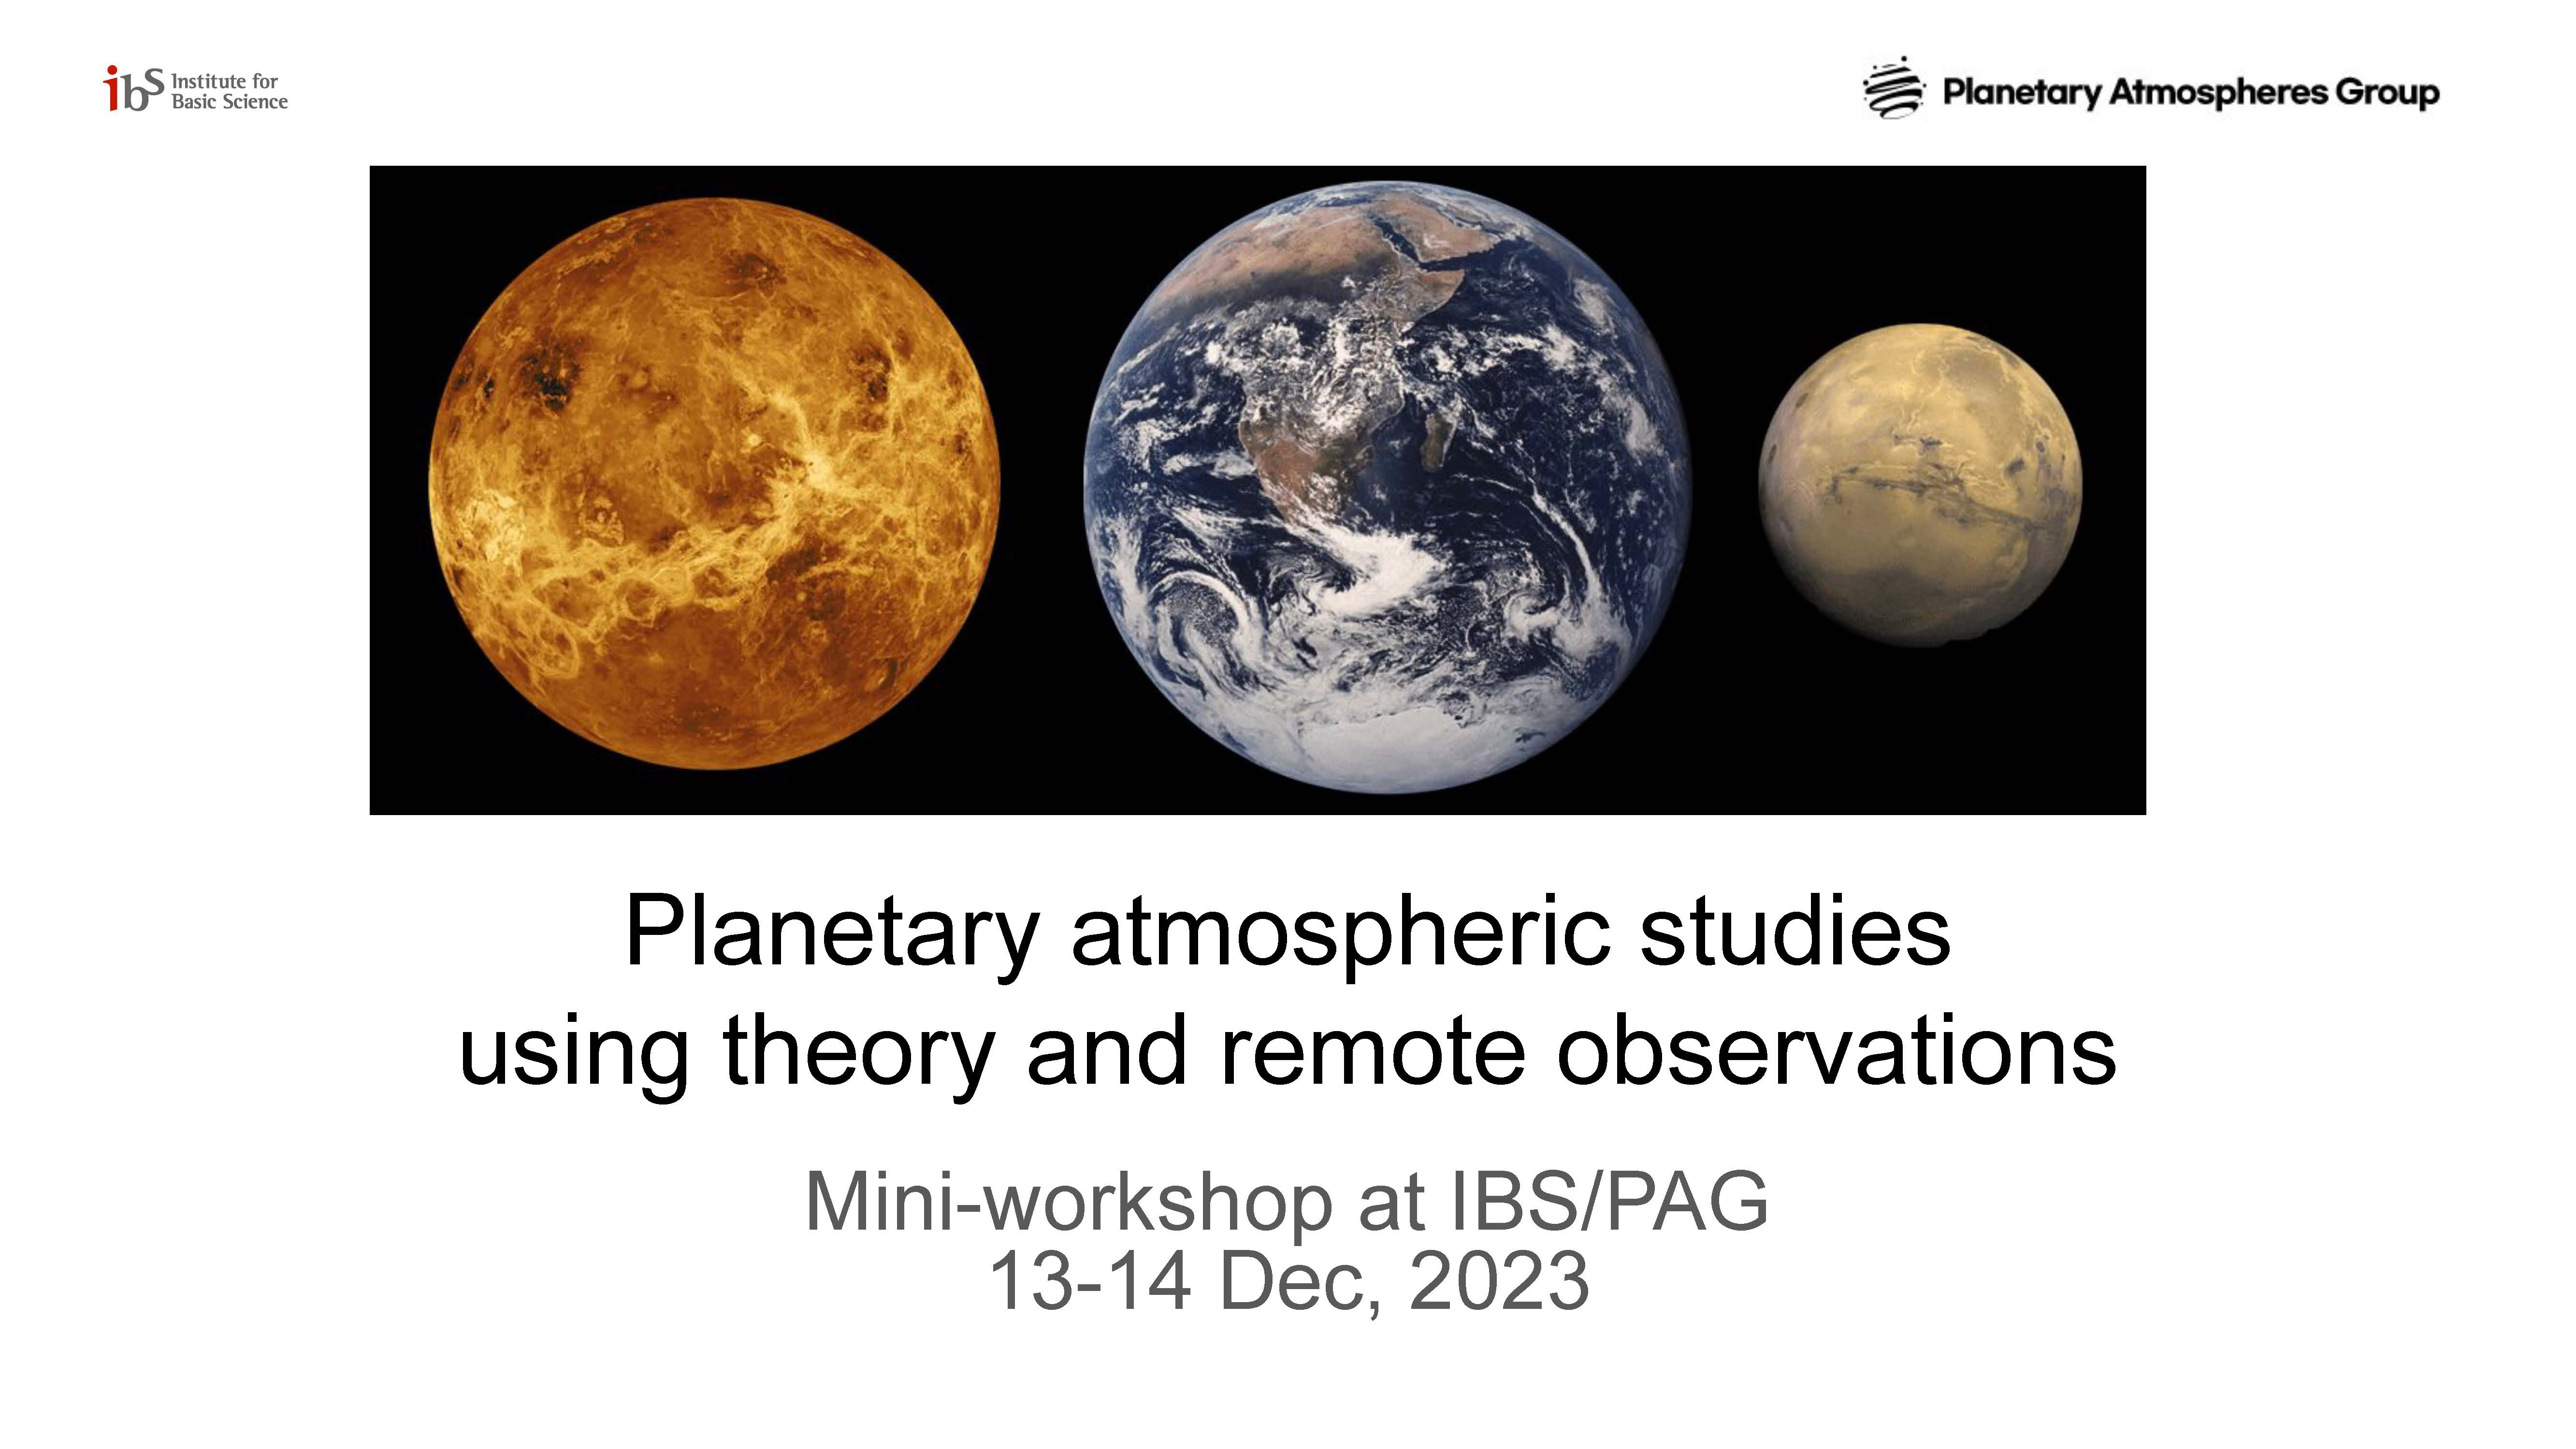 [Mini-workshop] 13-14 Dec 2024, Planetary atmospheric studies  using theory and remote observations